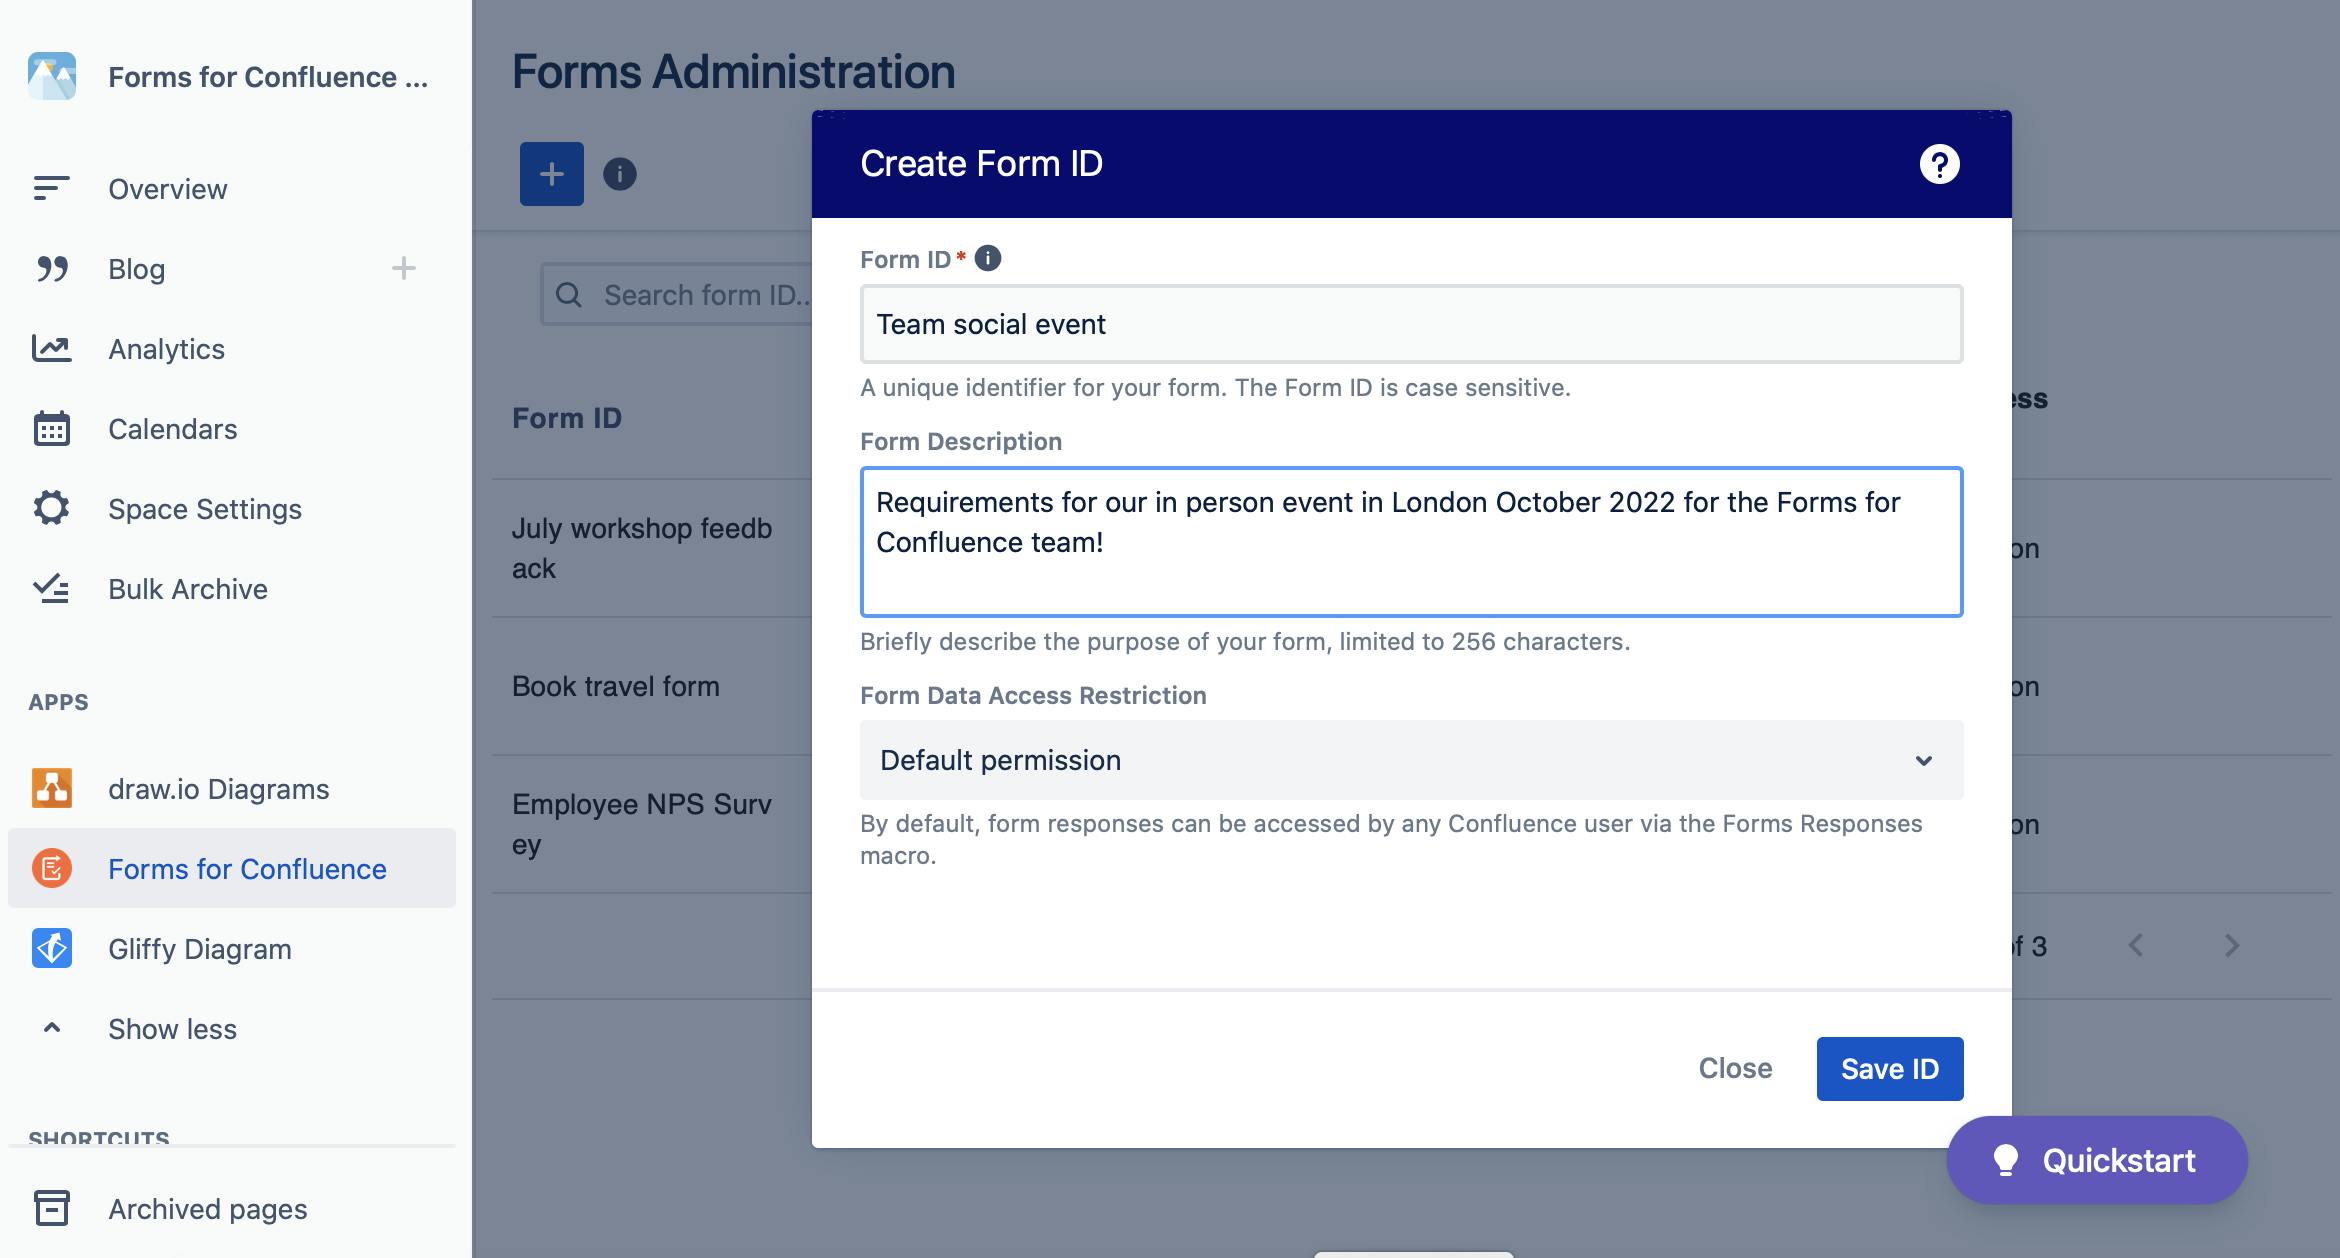 Forms for Confluence back end with form to enter form ID